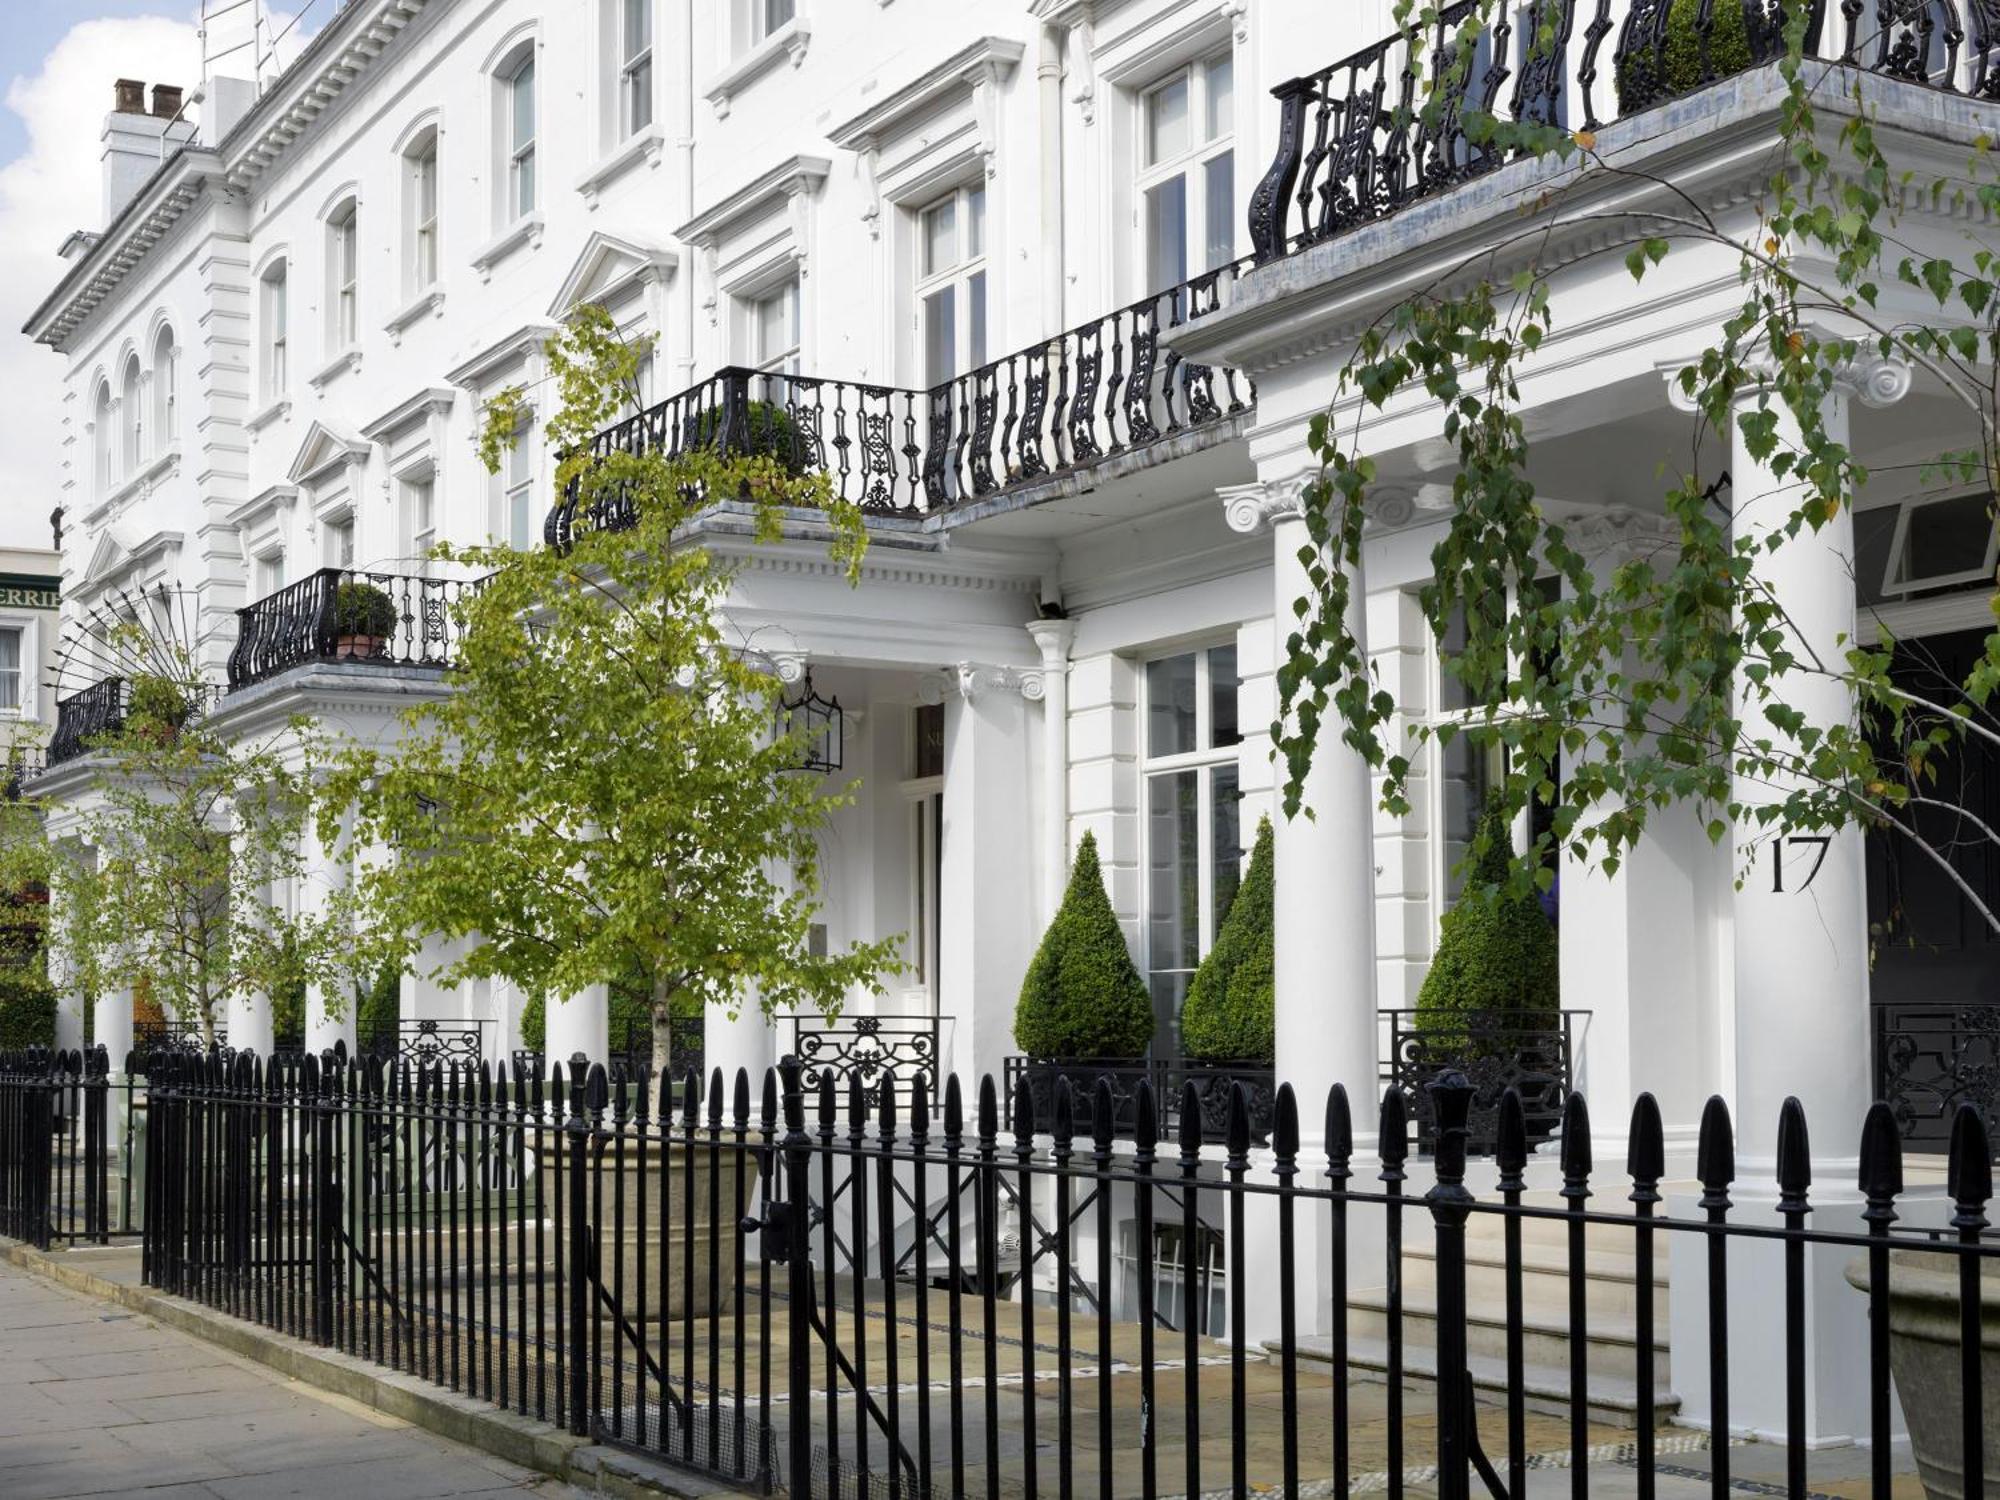 Number Sixteen, Firmdale Hotels London Exterior photo